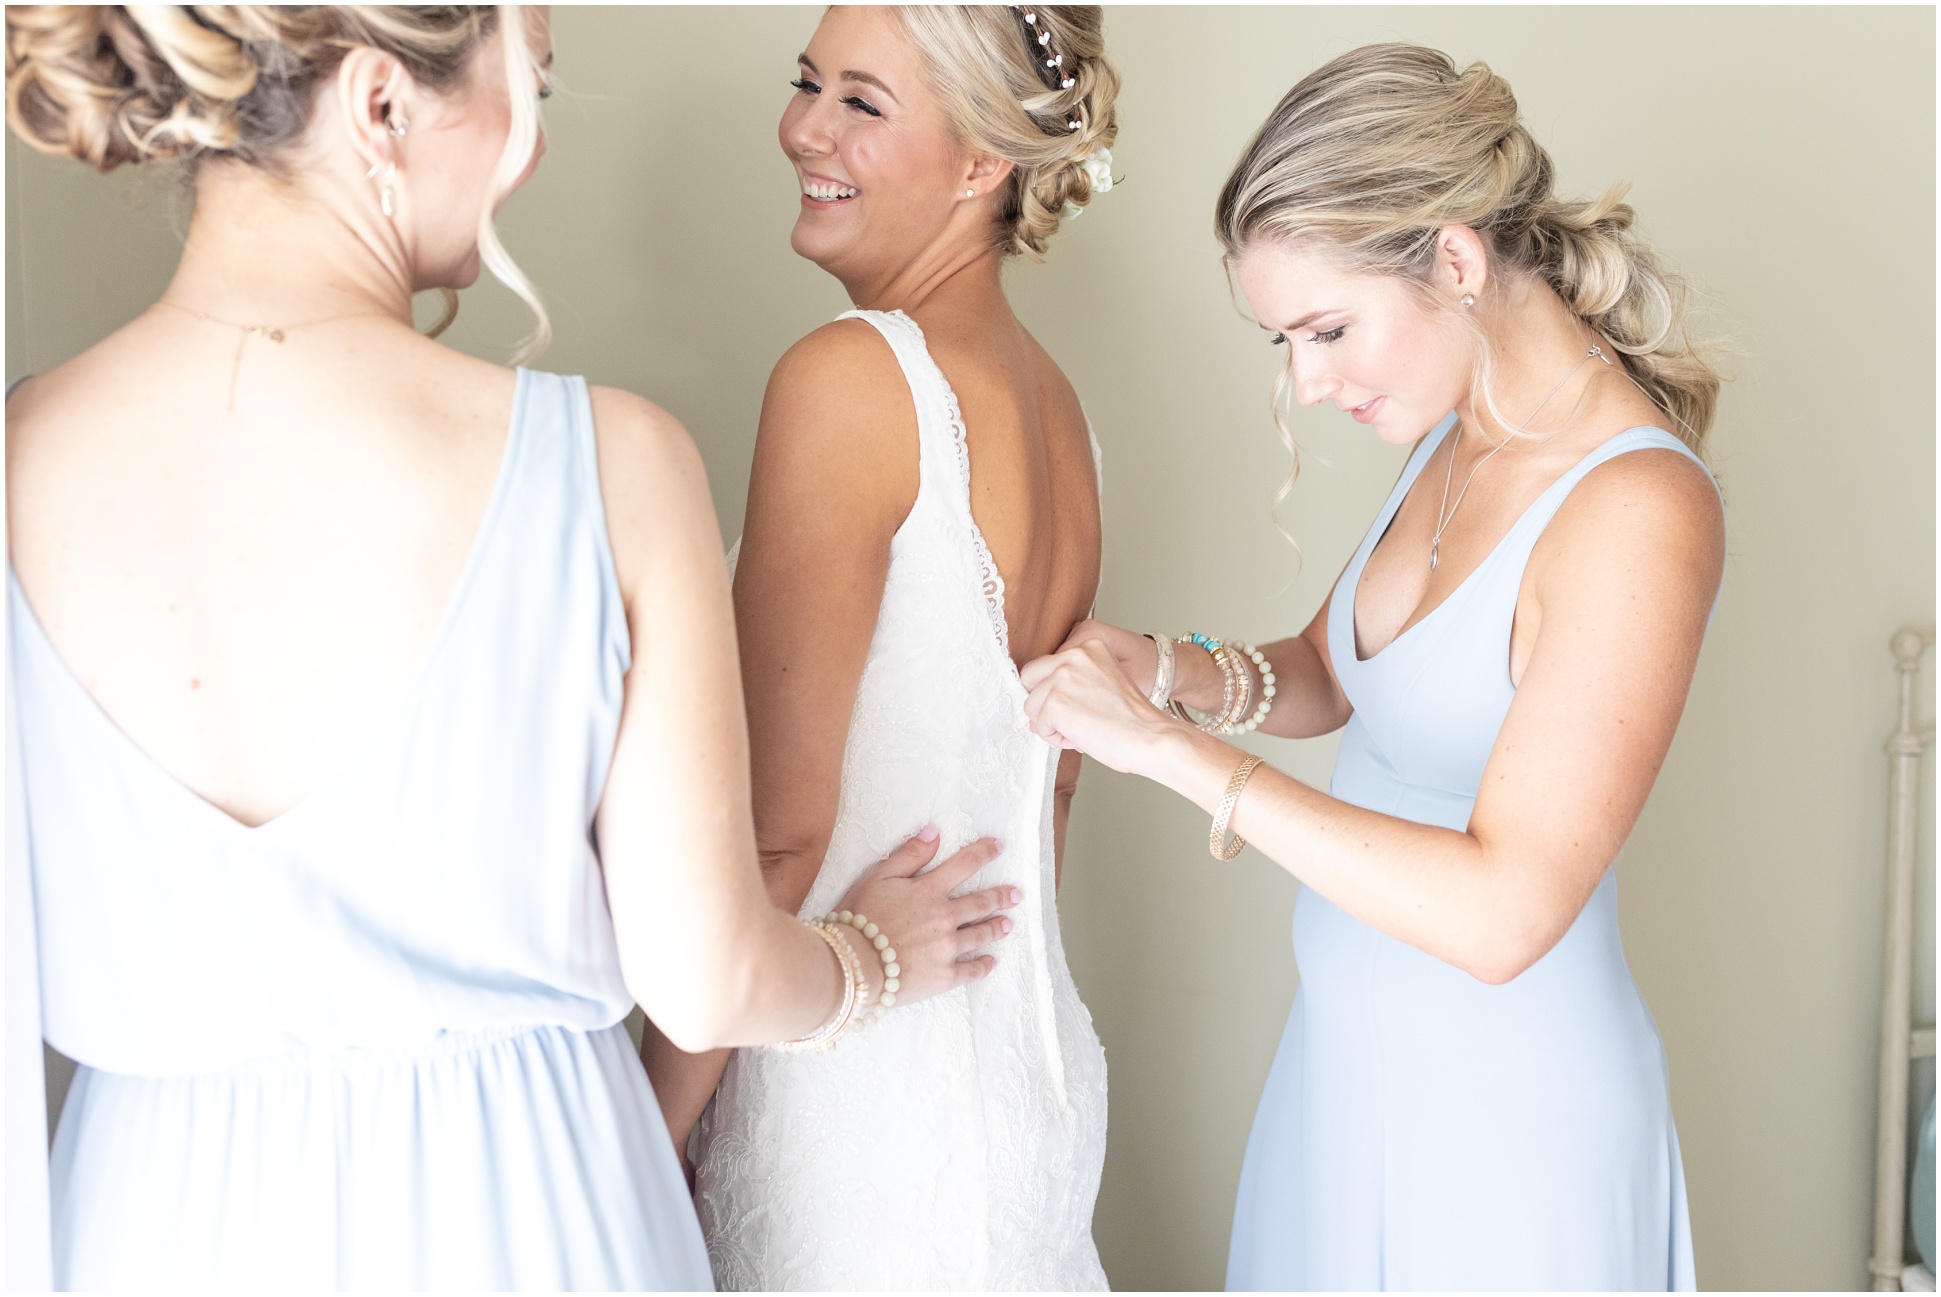 Maid of honors helping bride get into her dress